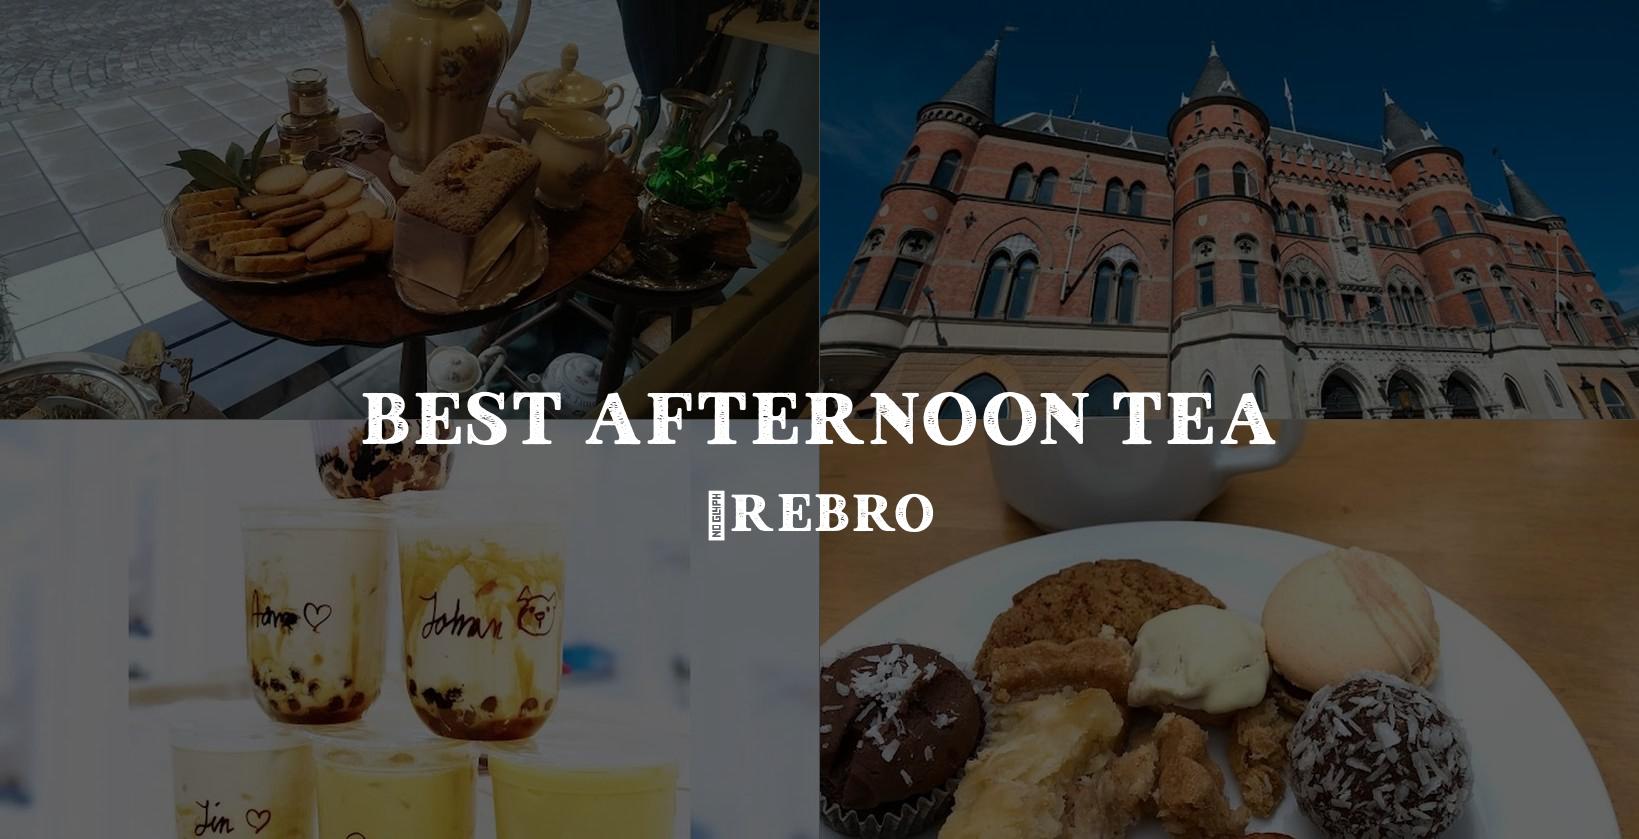 Choosing the perfect spot for afternoon tea in Örebro